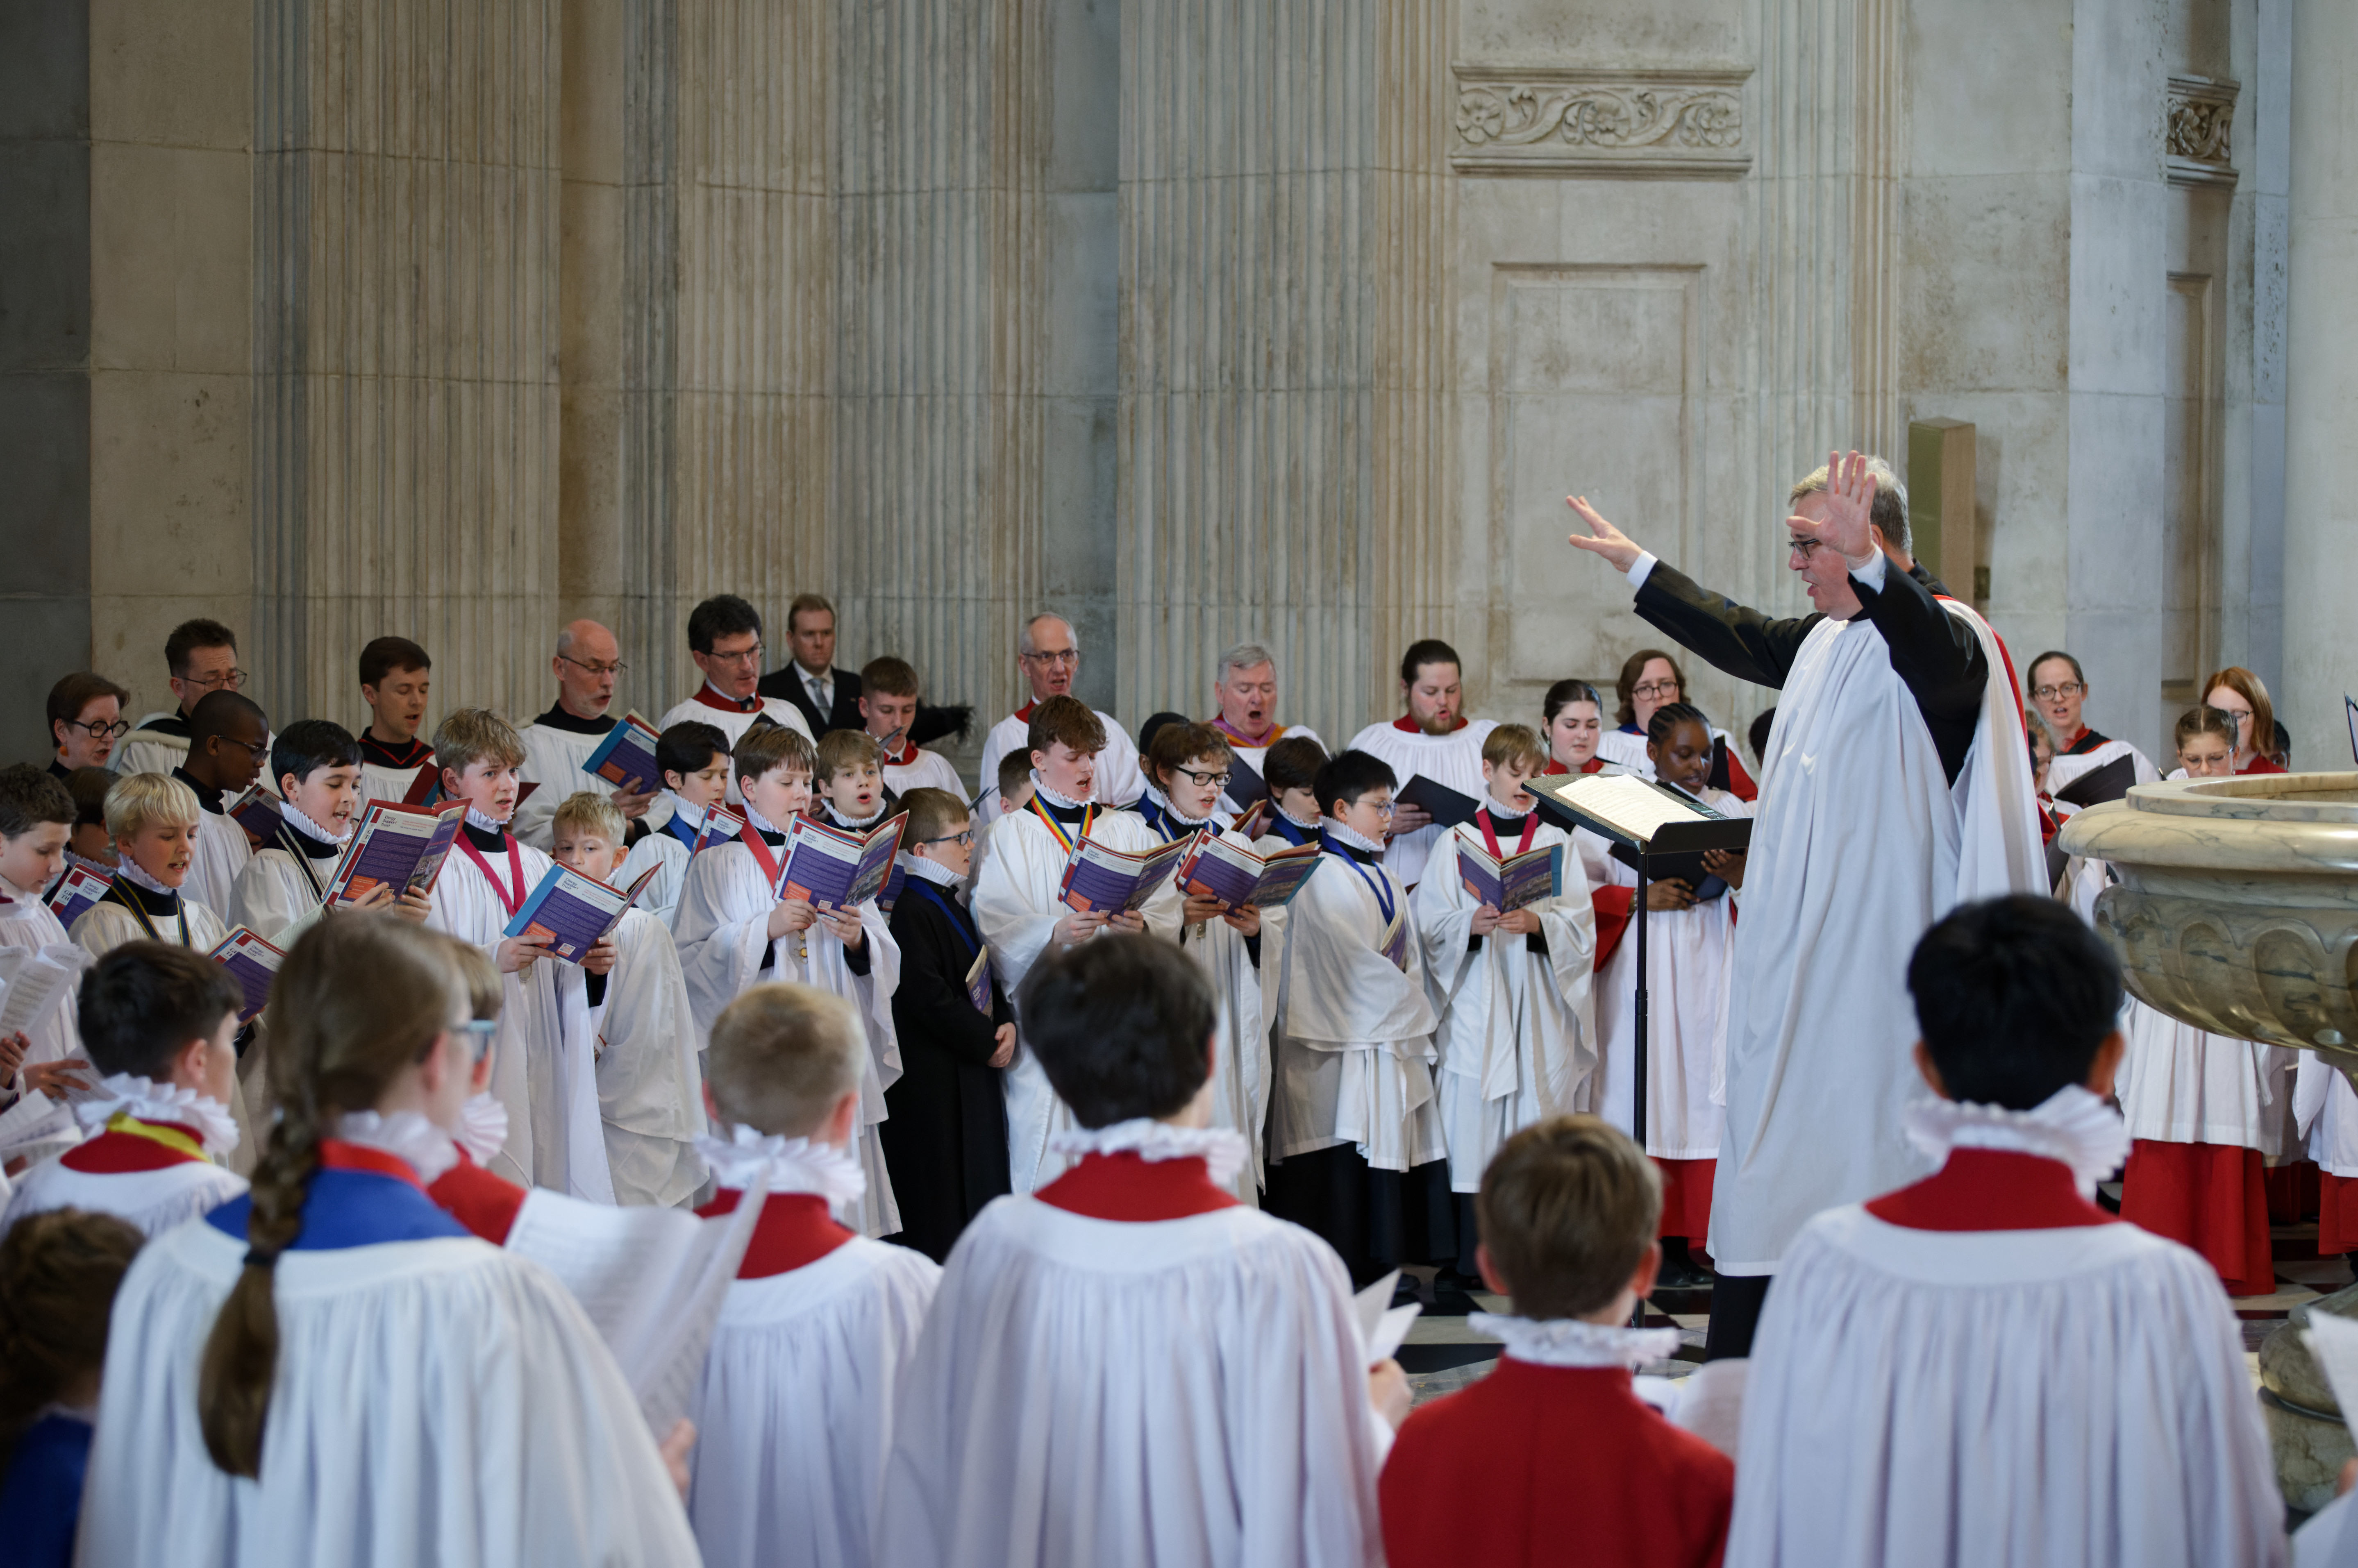 The combined choirs, lead by a choirmaster, performing in a semi-circle by the West Doors.